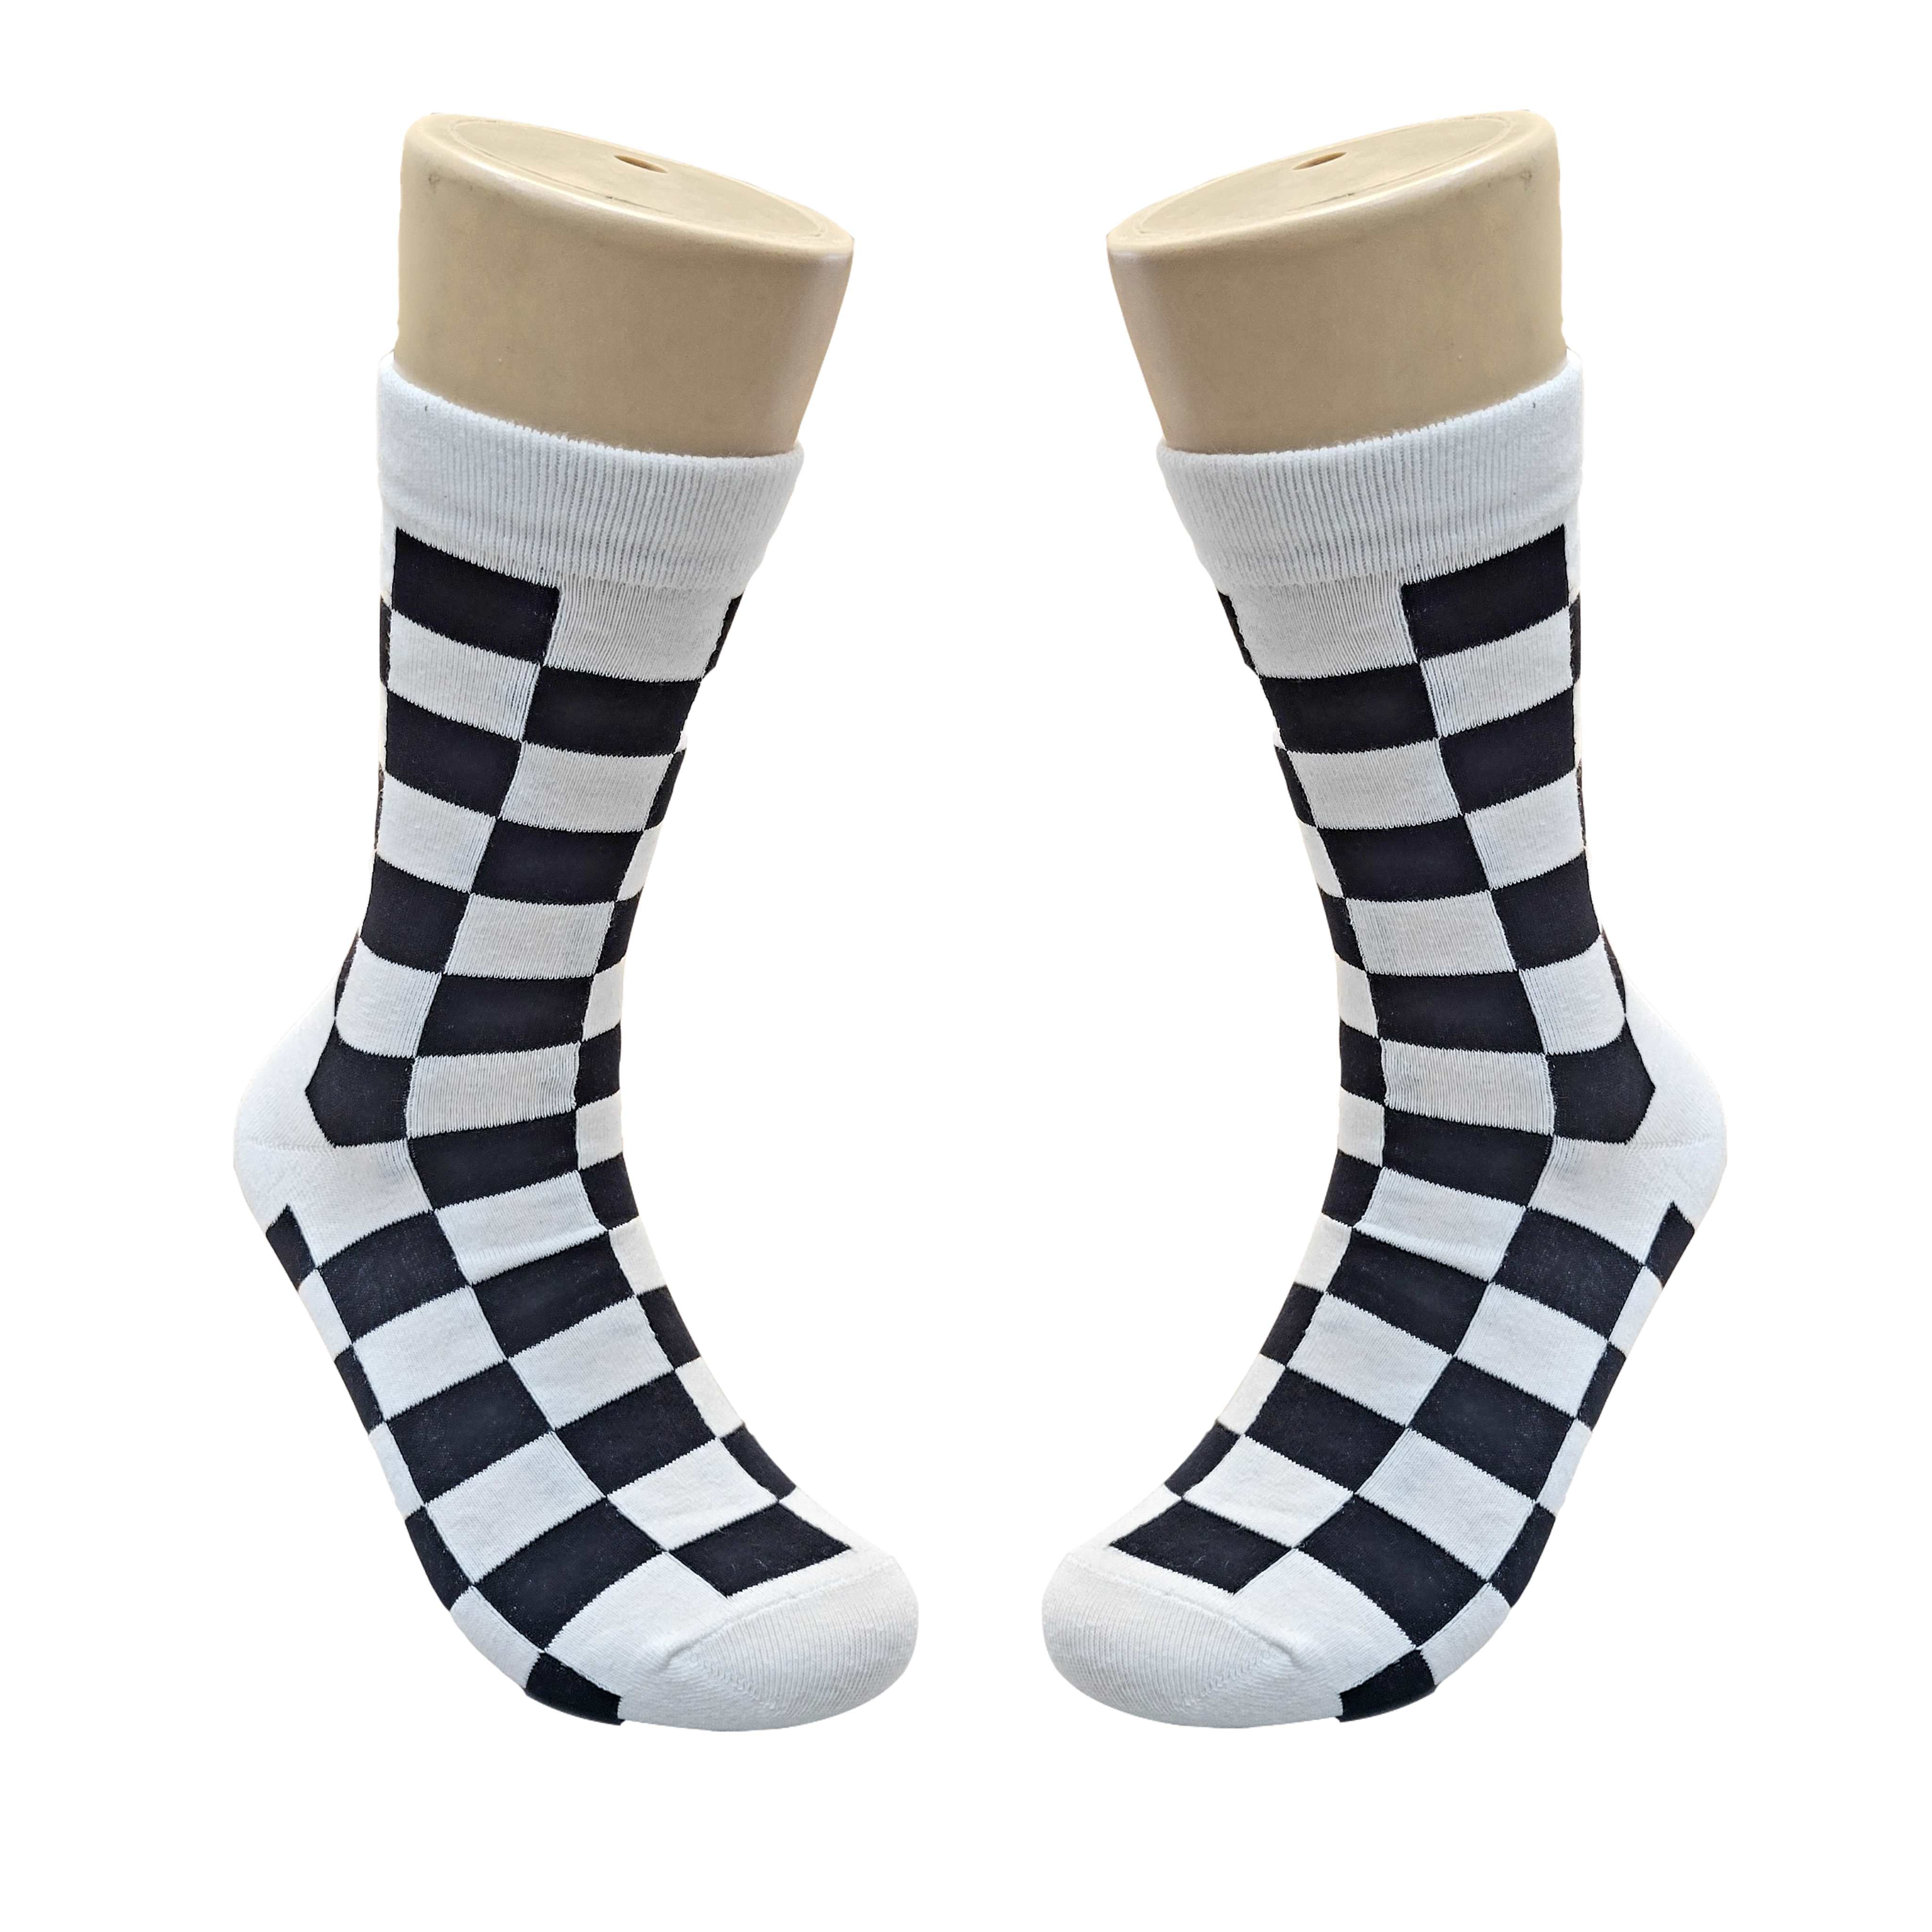 Black and White Checkered Socks from the Sock Panda (Adult Large - Men's Shoe Sizes 8-12)